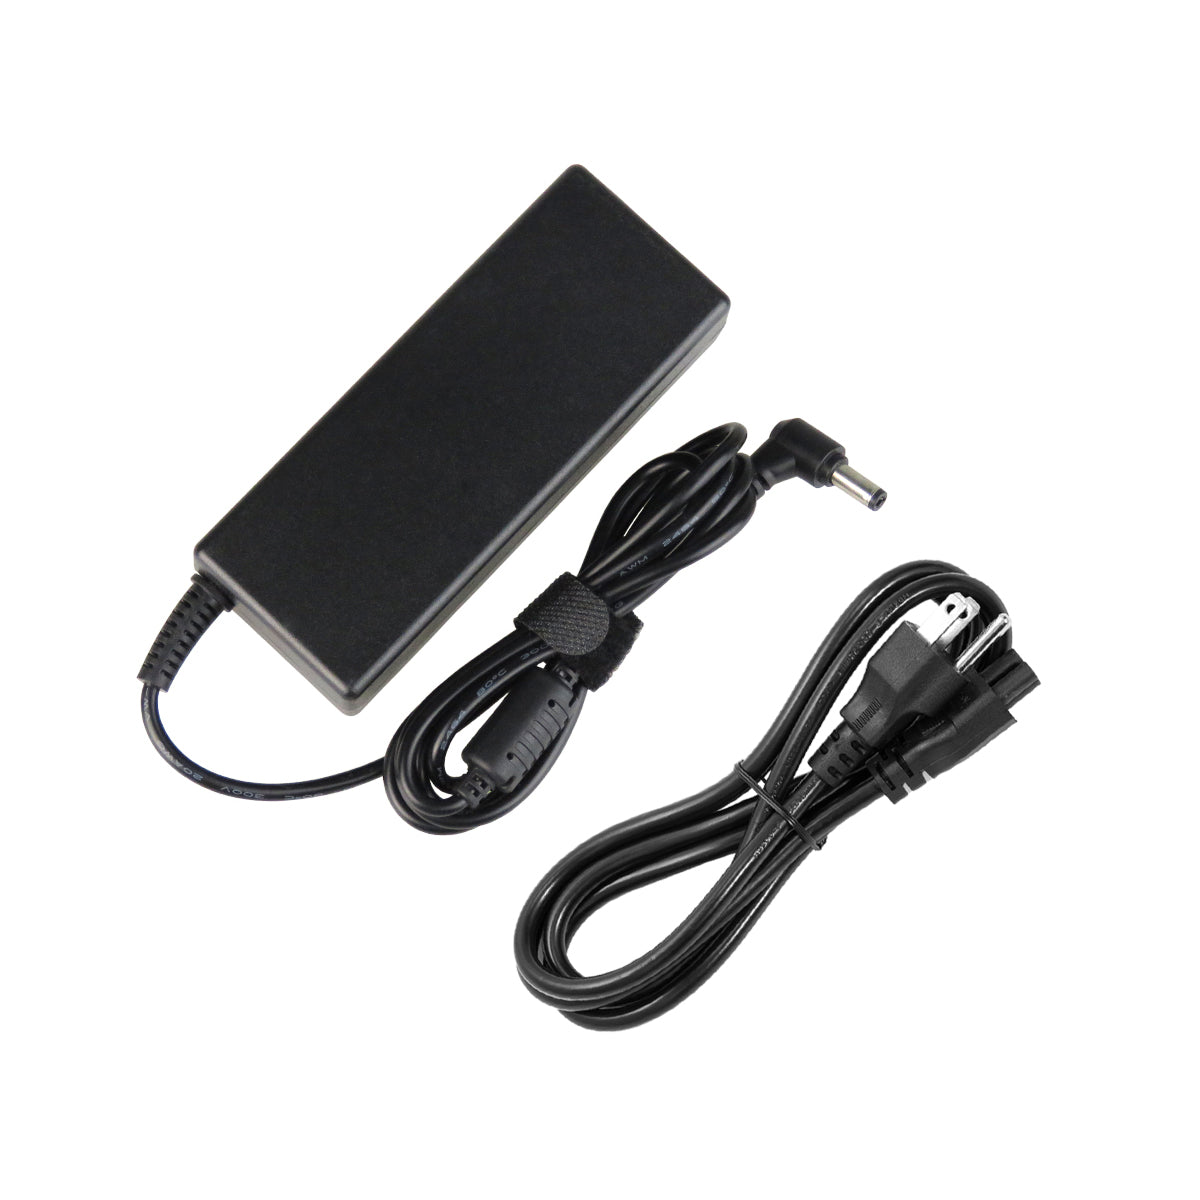 AC Adapter Charger for ASUS X62J Notebook.